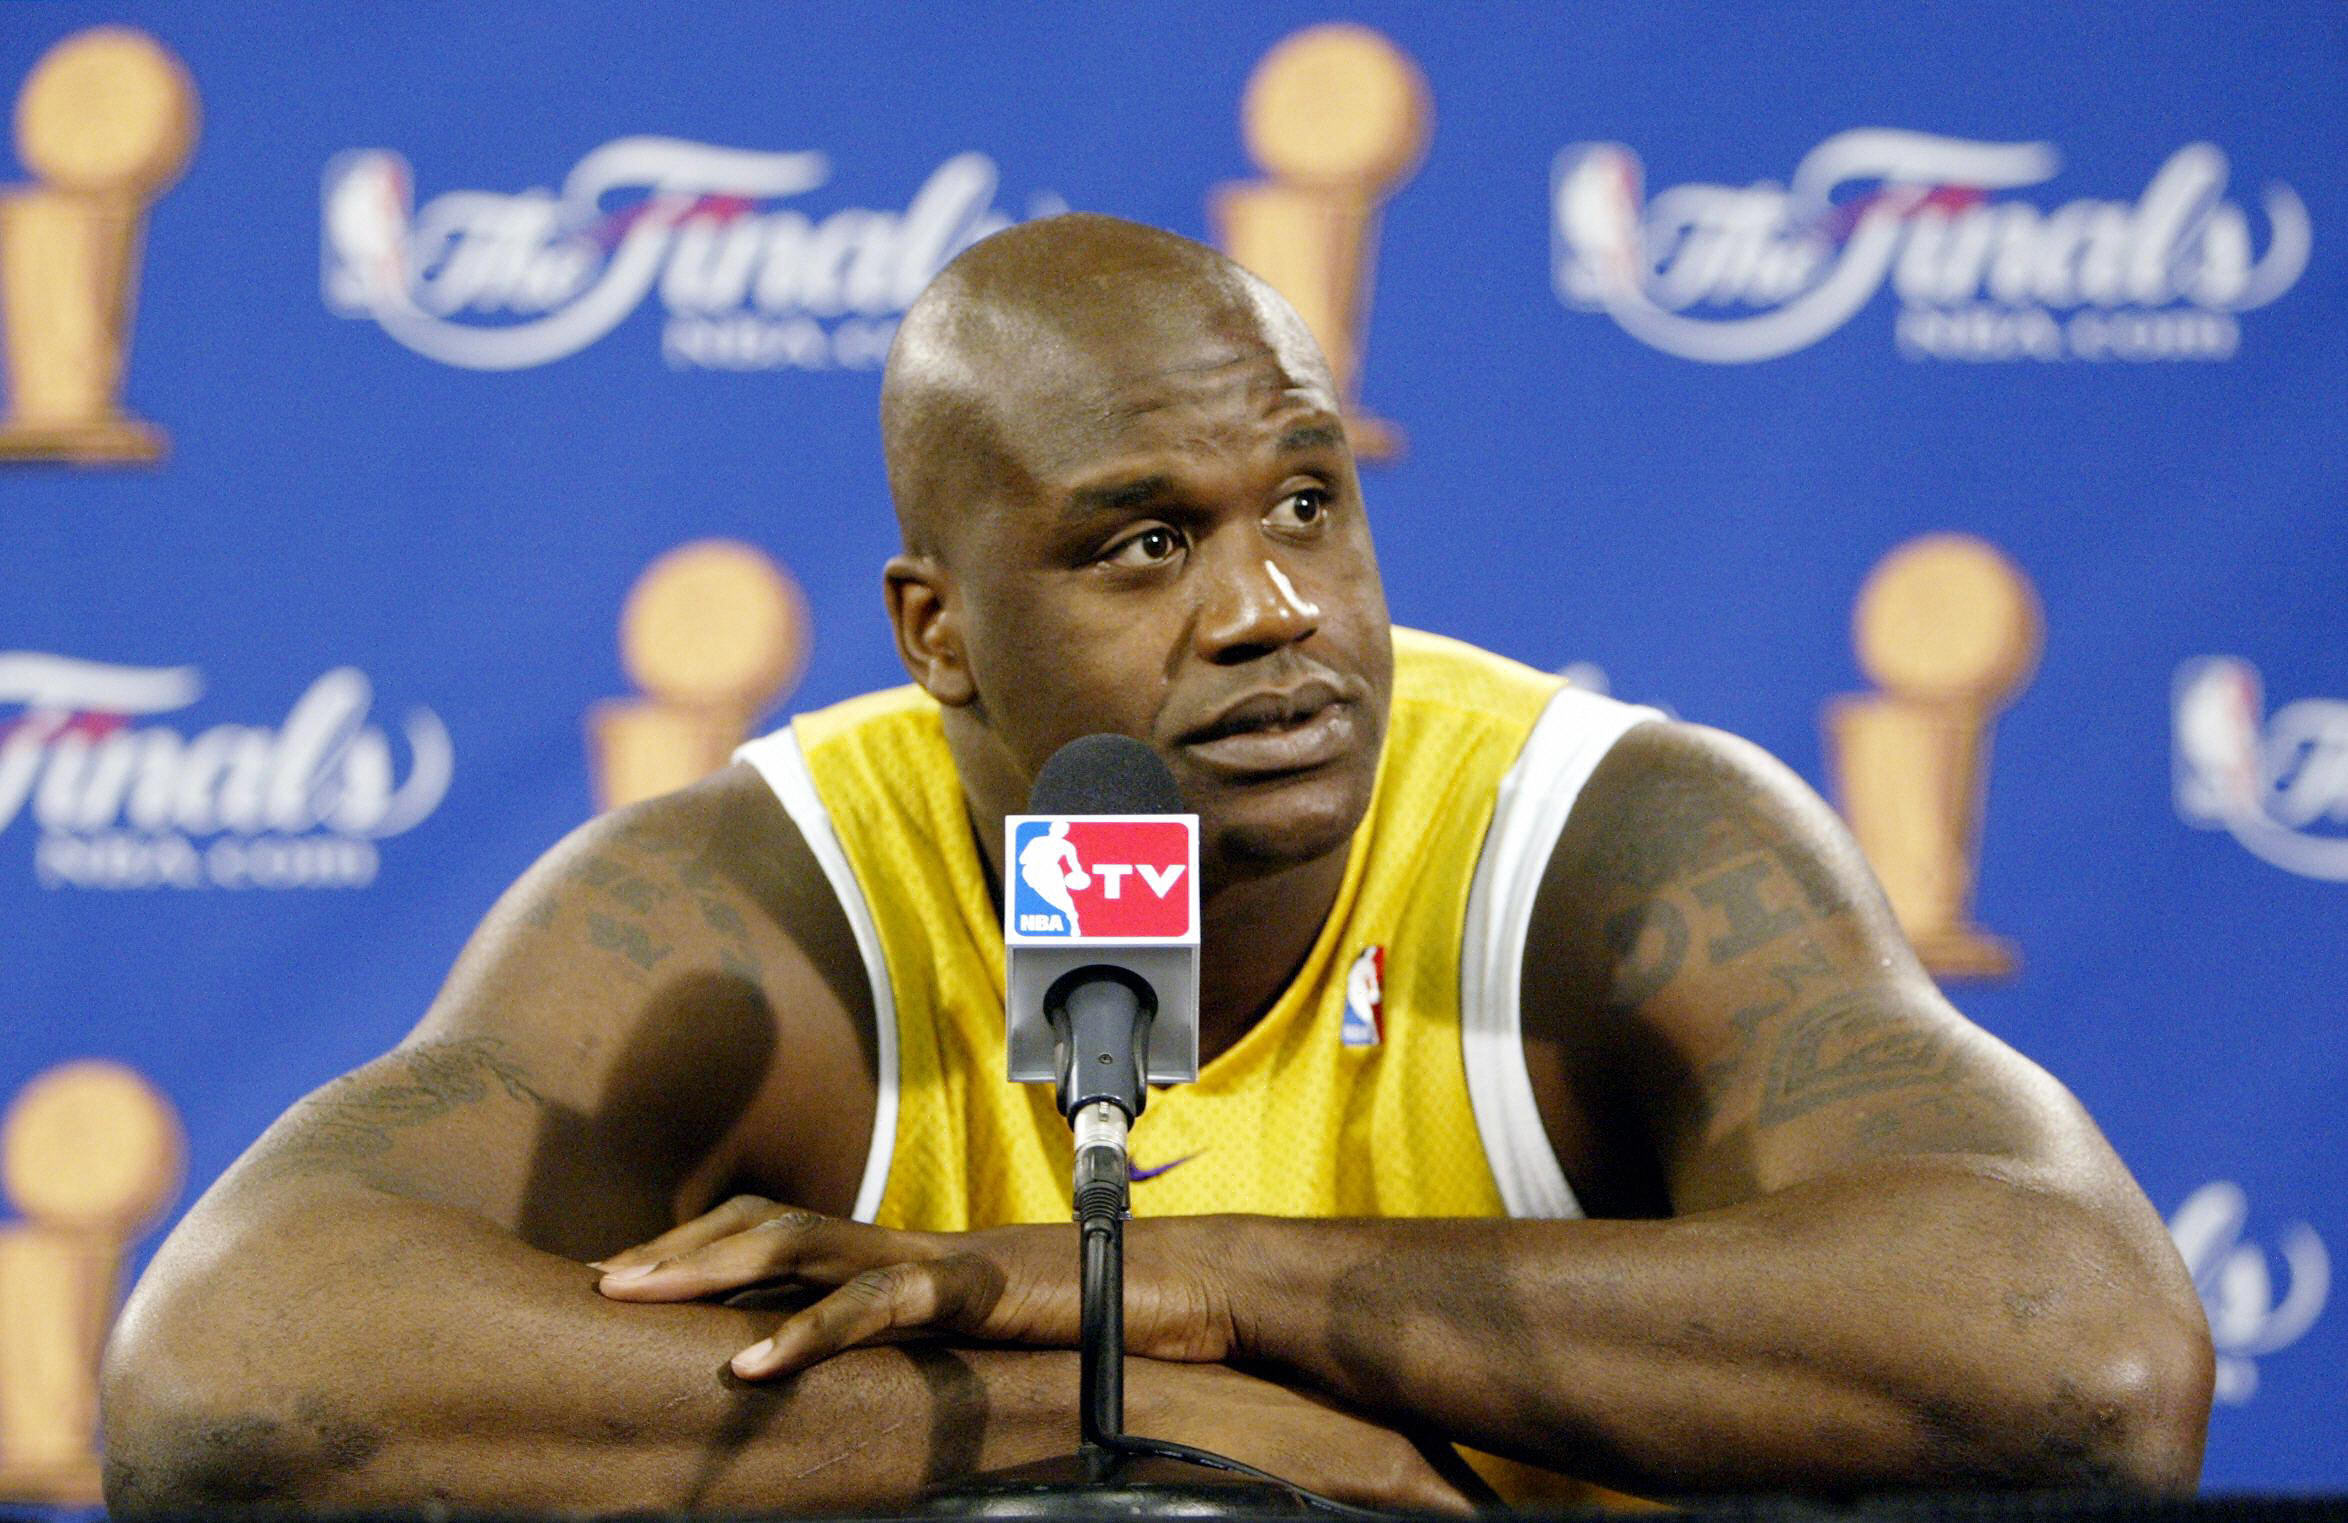 Former Los Angeles Lakers center Shaquille O'Neal answers questions at a press conference during the 2004 NBA Finals